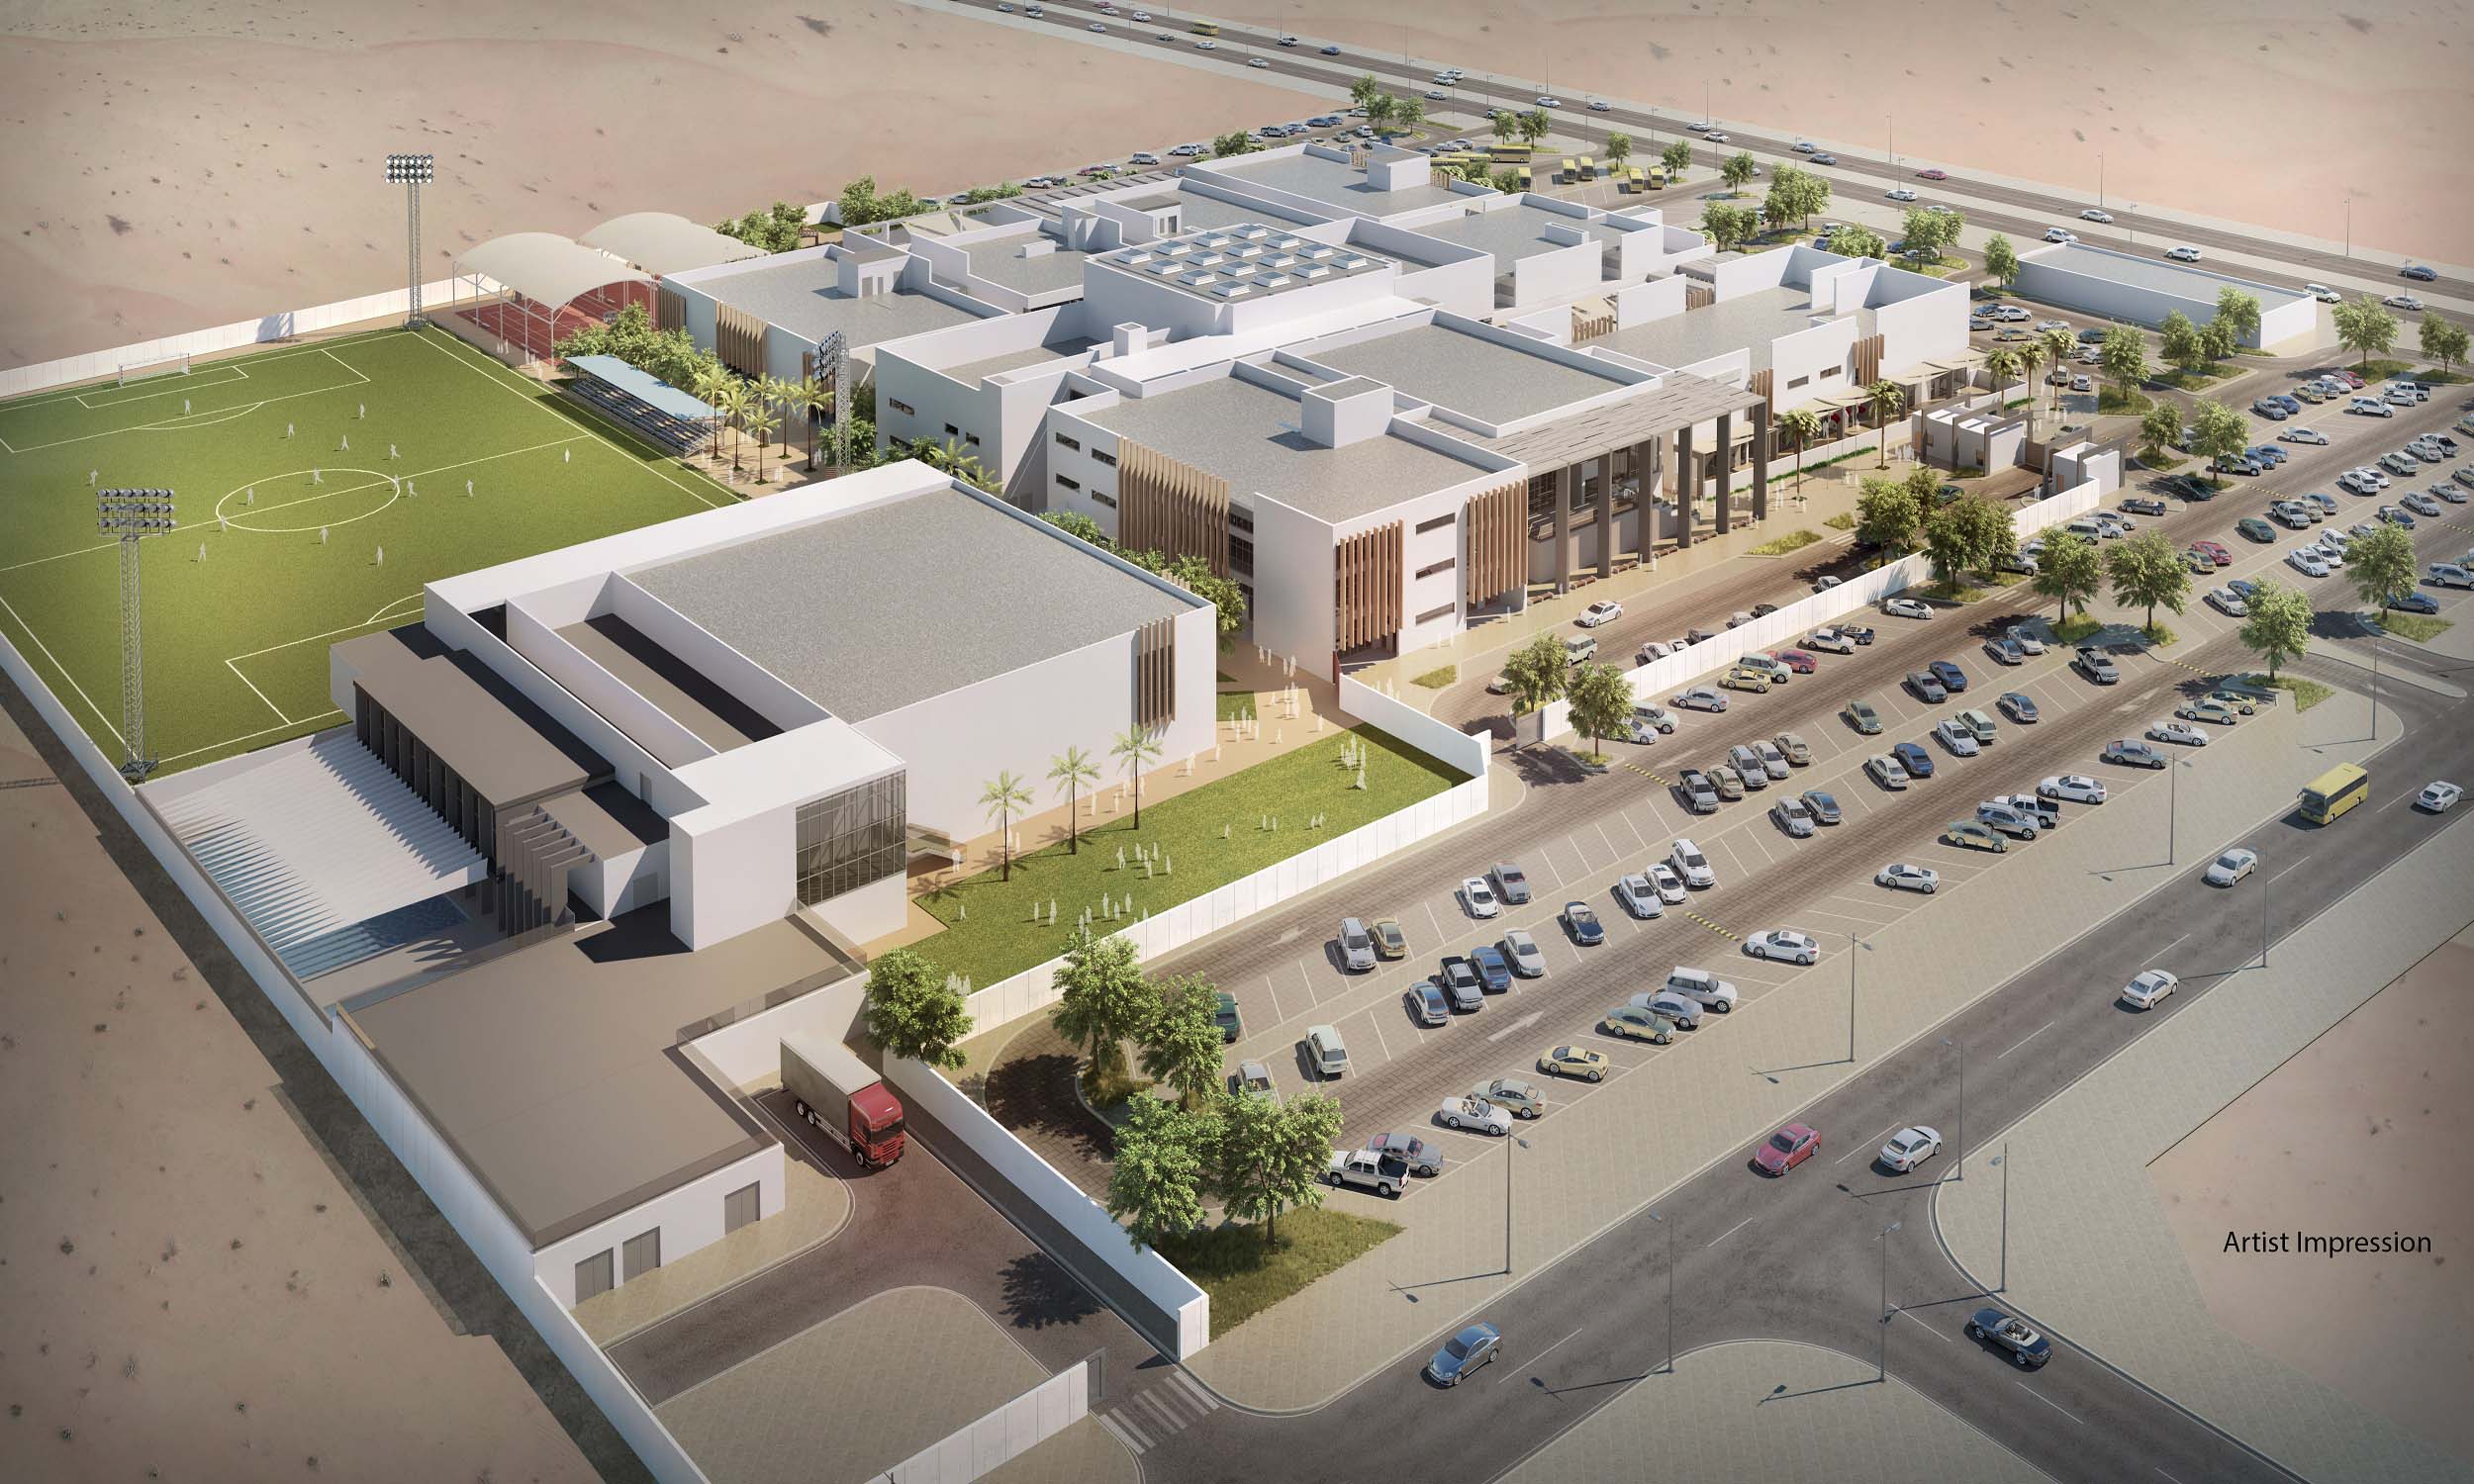 Phalanx Get tangled cost ACS Doha announces new campus following lease issues - Doha News | Qatar